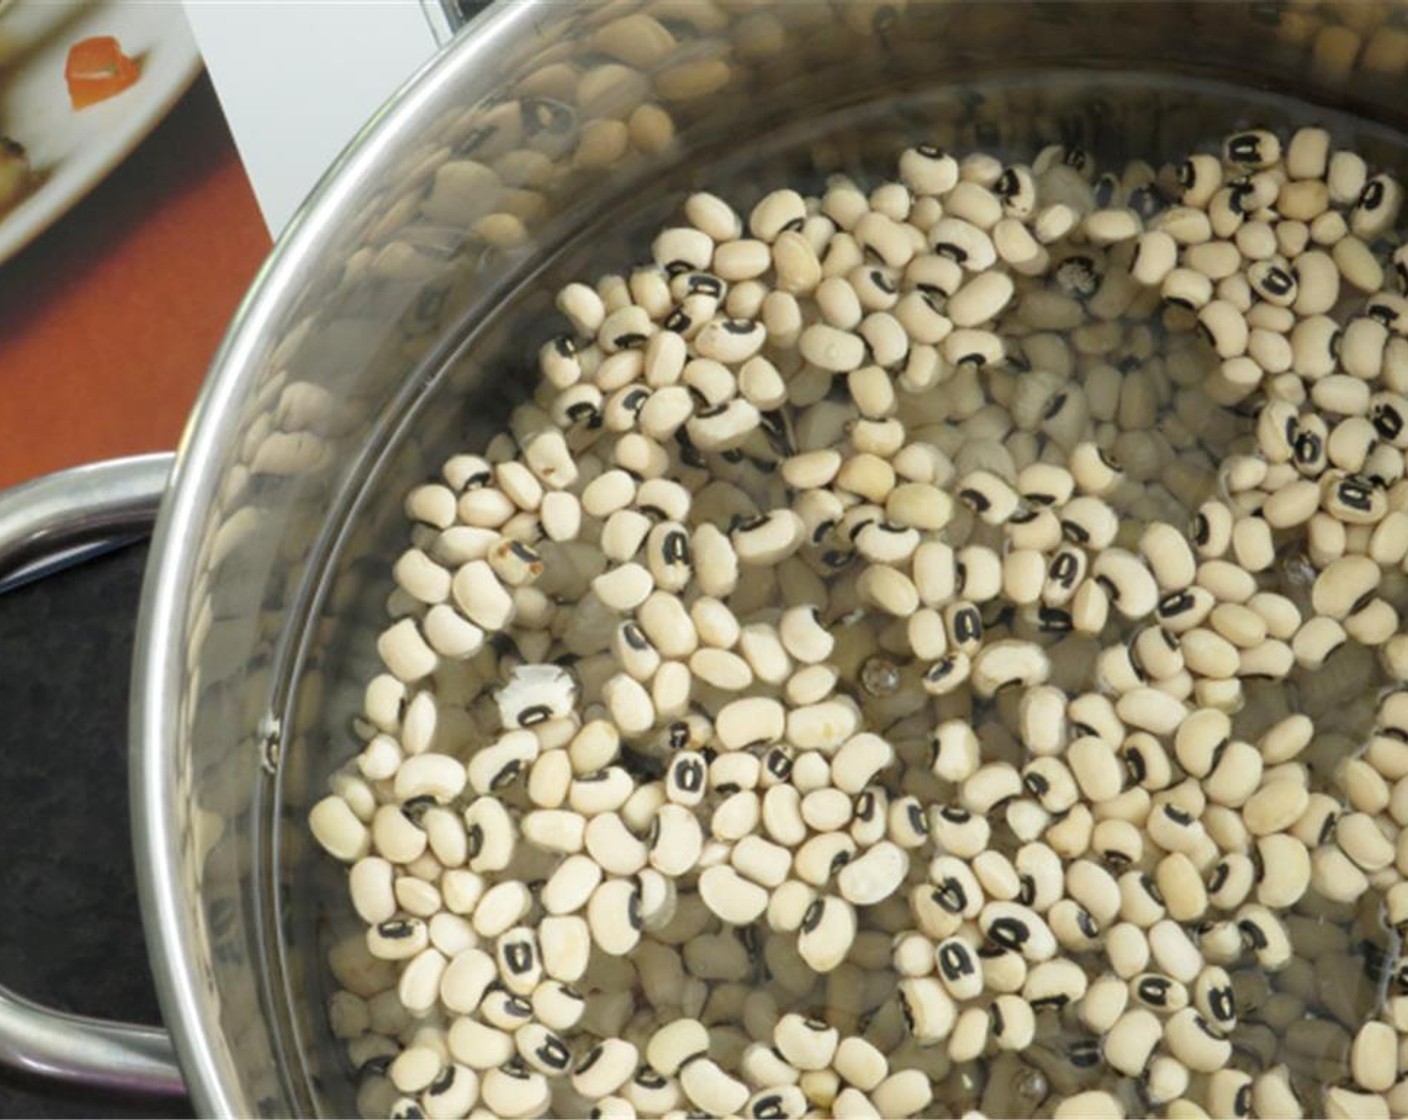 step 2 Place Dry Black Eyed Peas (4 3/4 cups) in a large pot. Sort through the beans and remove any foreign material (i.e. pebbles, poor quality beans, etc.). Add enough water to cover beans by about 3 inches. Soak overnight at room temperature.